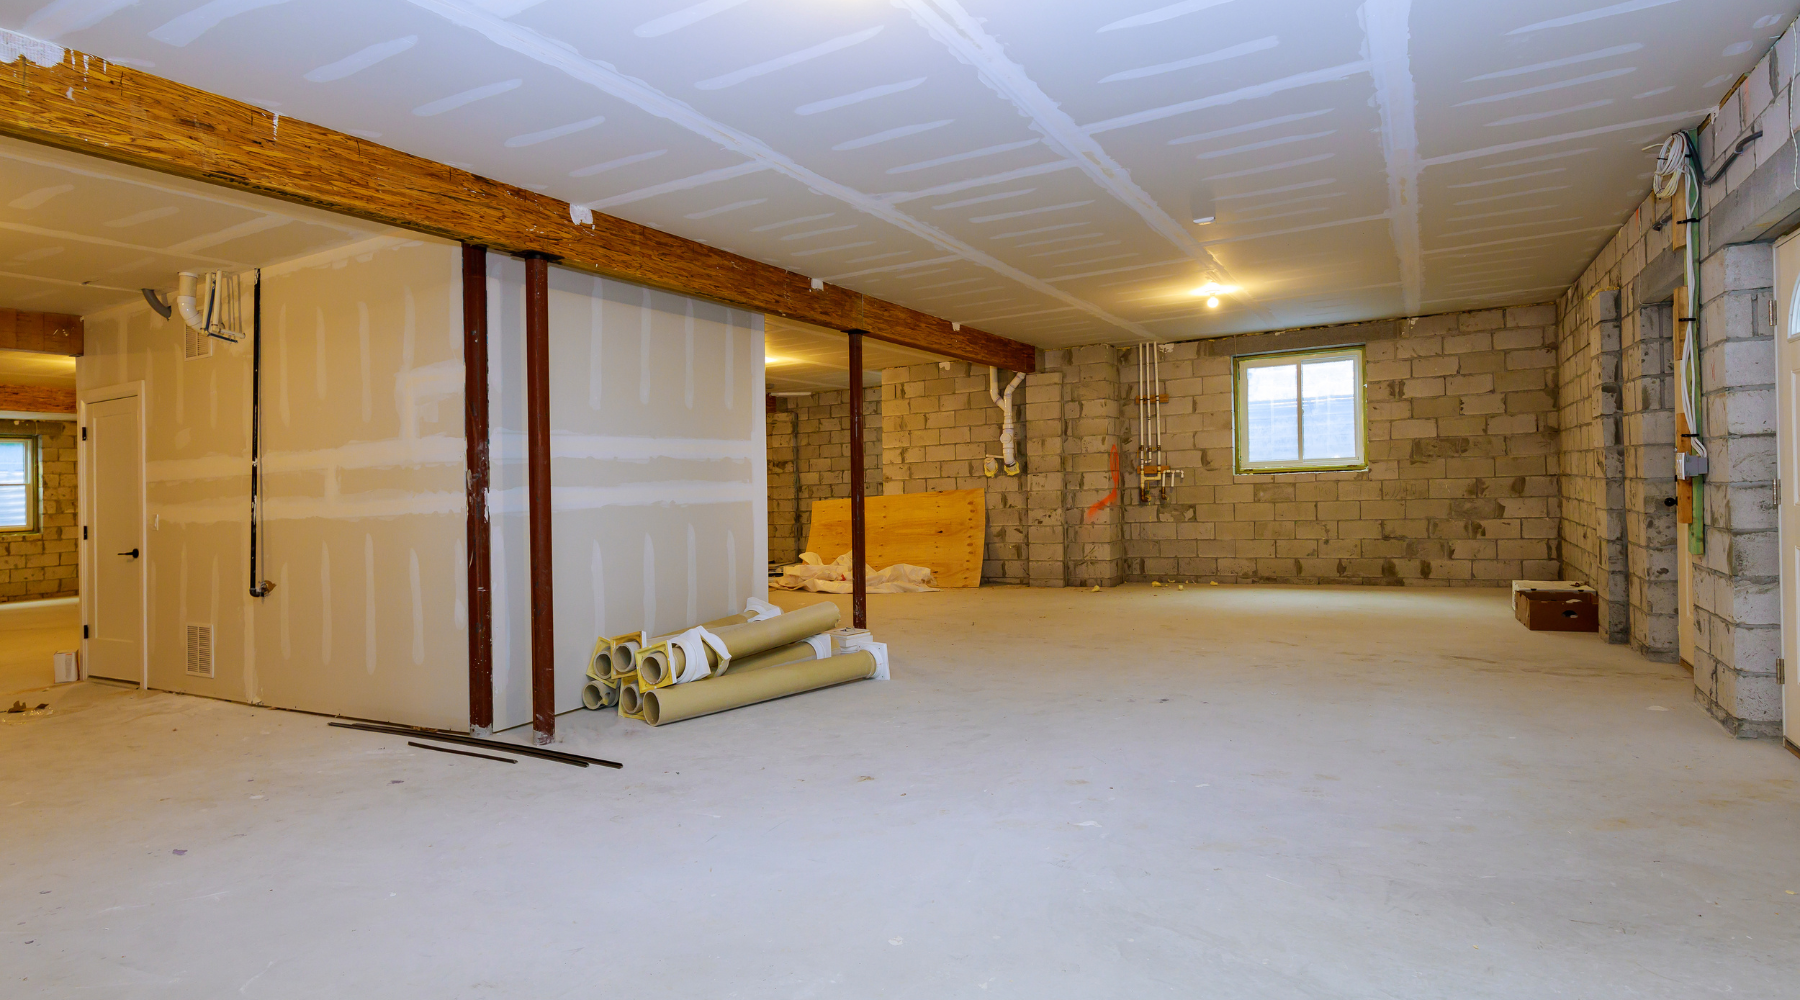 Top 10 Reasons Why Homeowners Renovate Their Basements